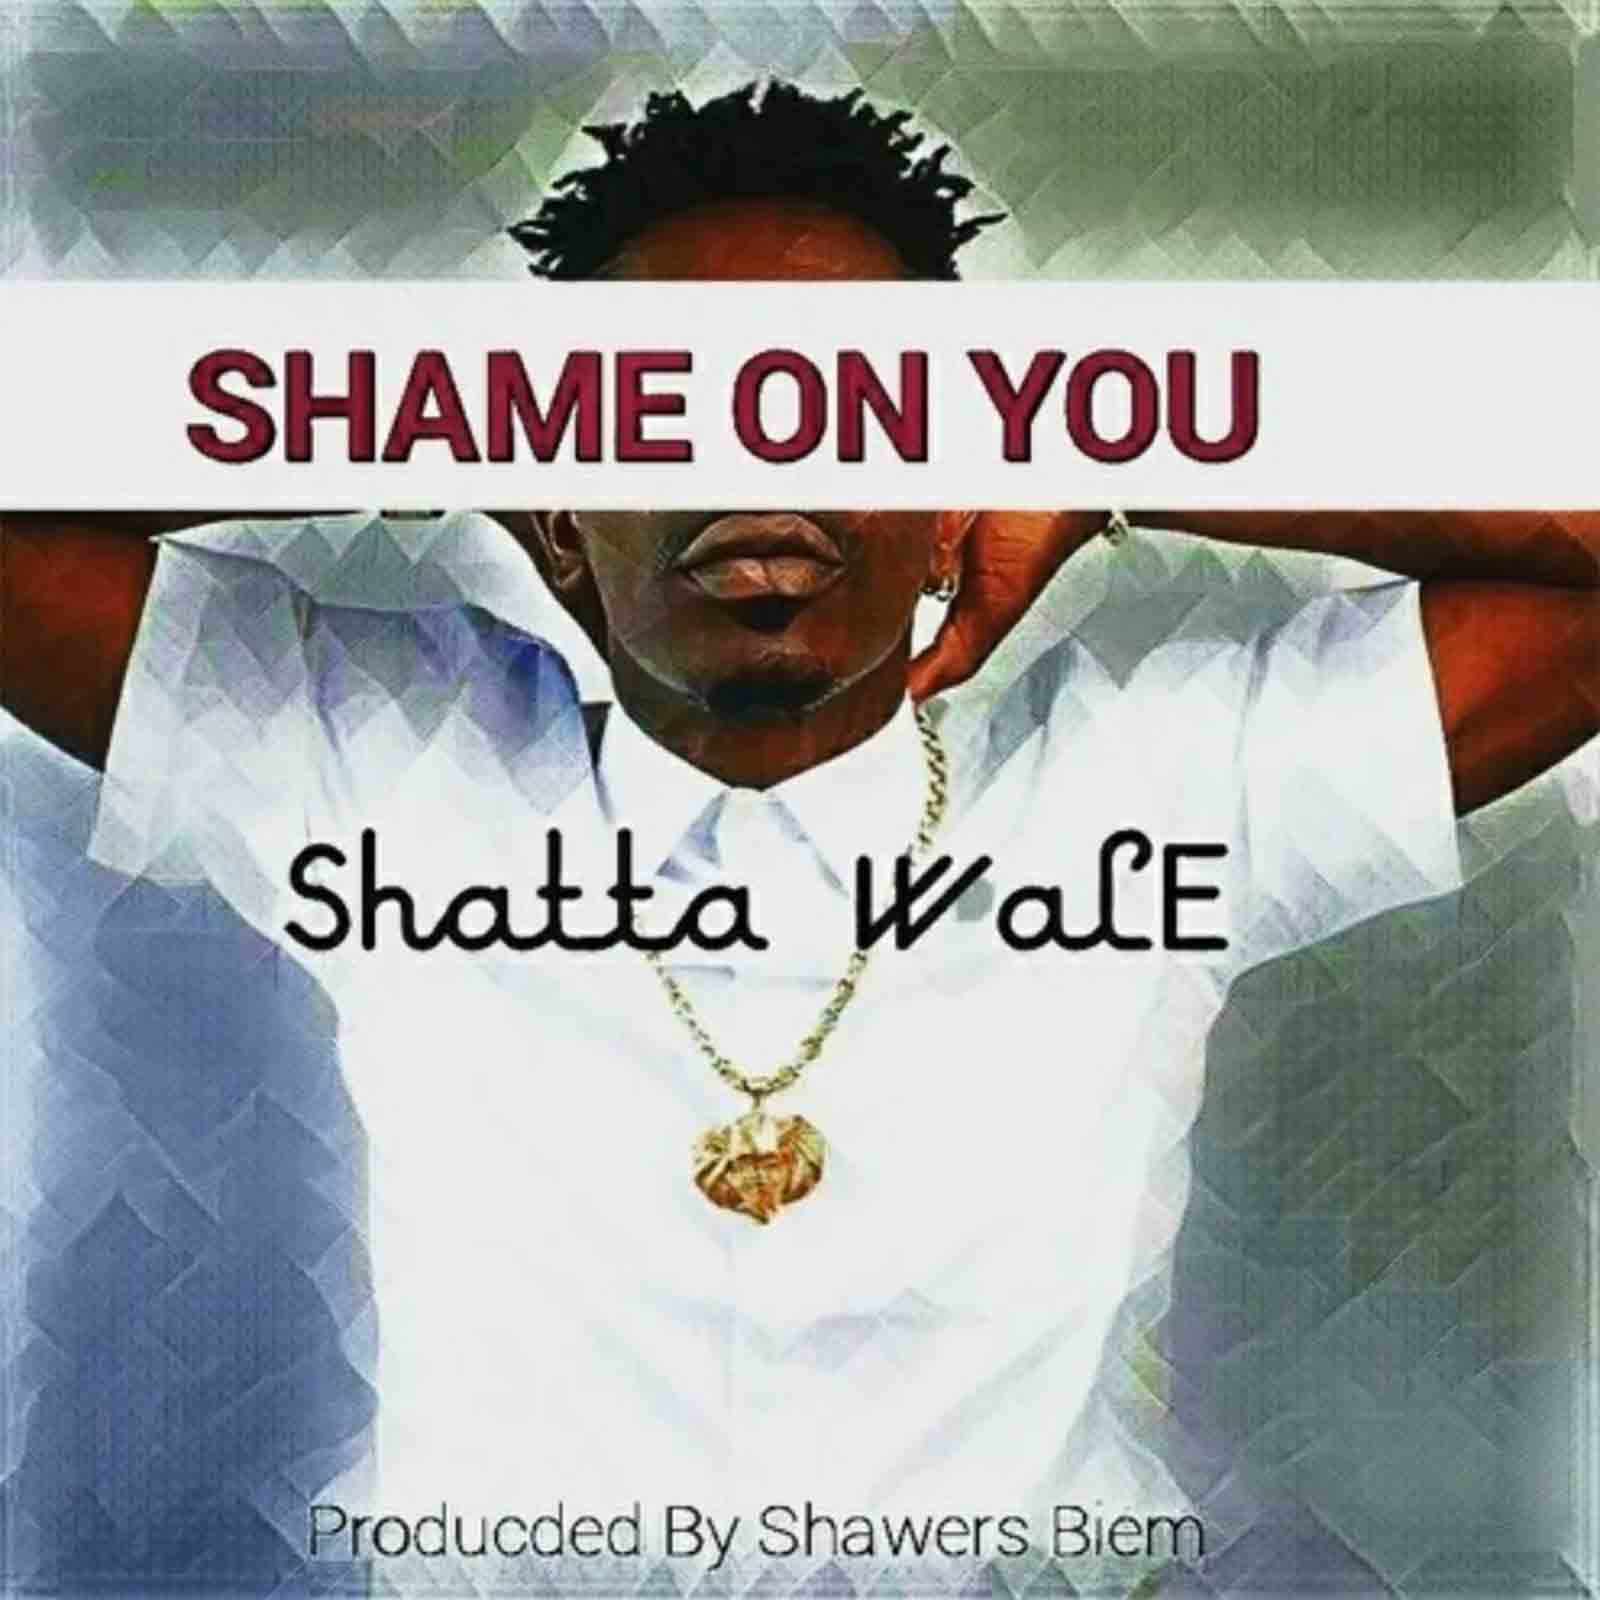 Shame On You (Tic Tac Diss) by Shatta Wale